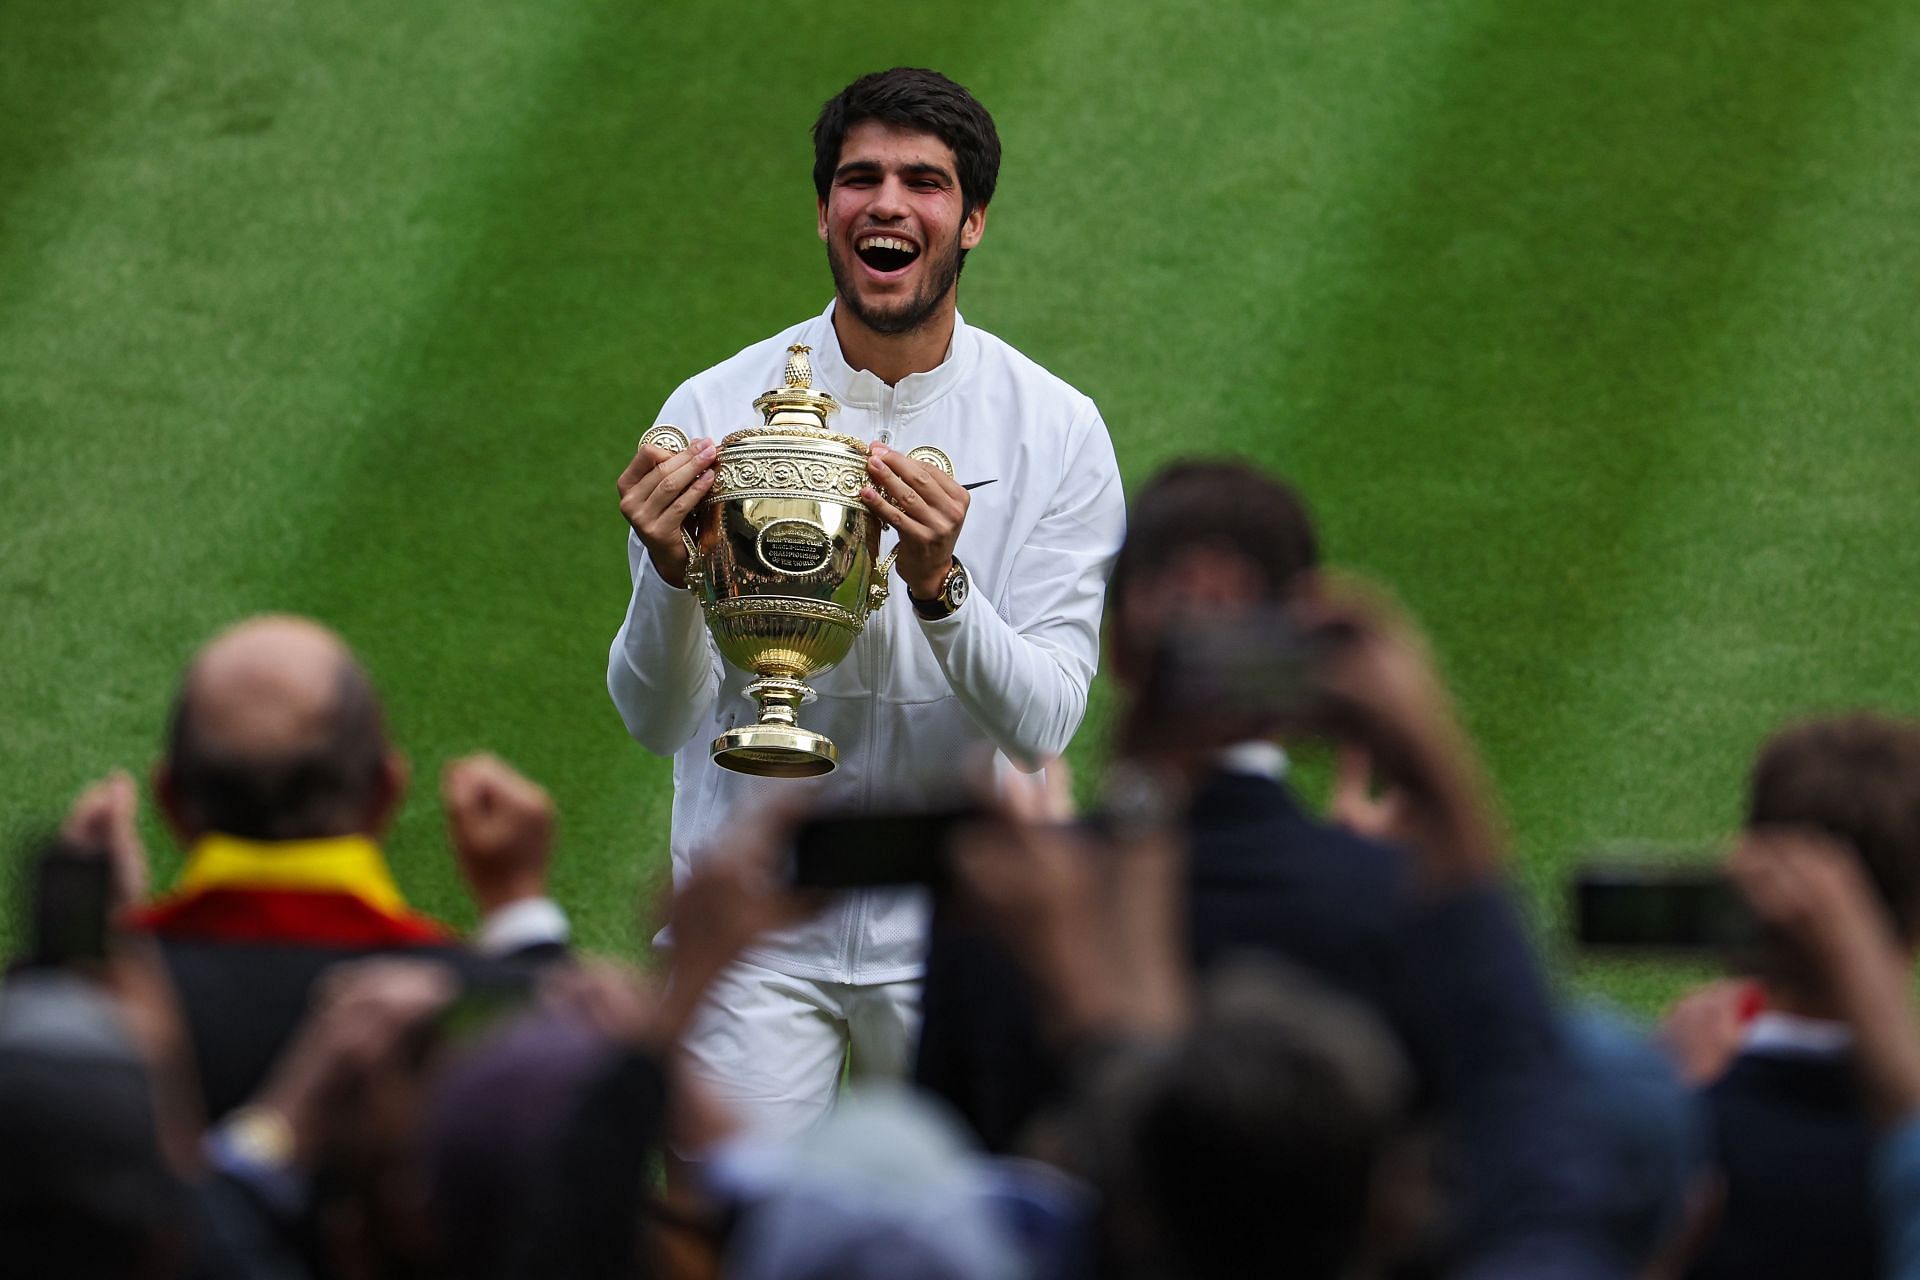 Carlos Alcaraz pictured with his Wimbledon trophy.